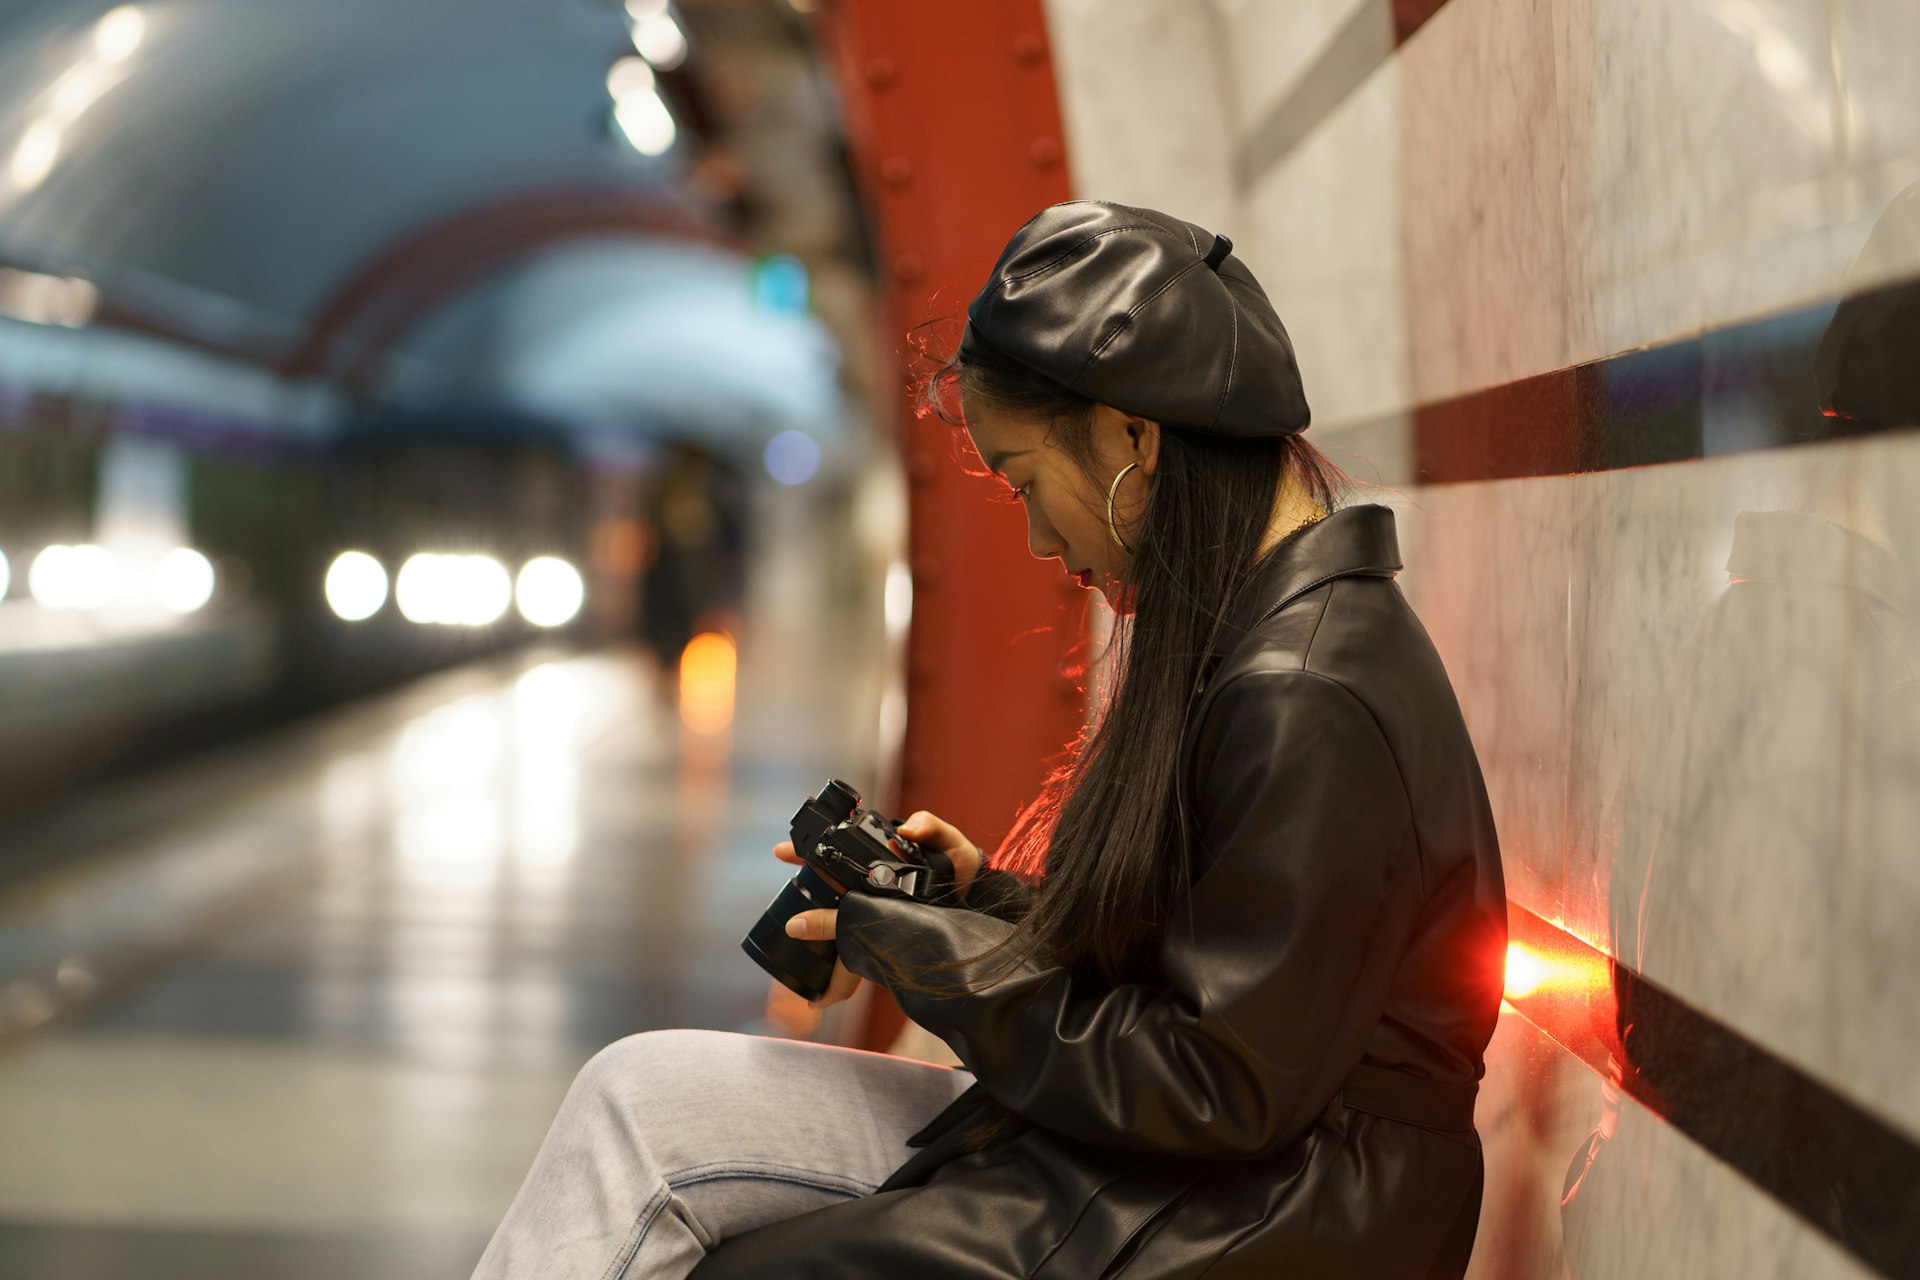 Young woman looks at photos on camera while waiting in metro station for train